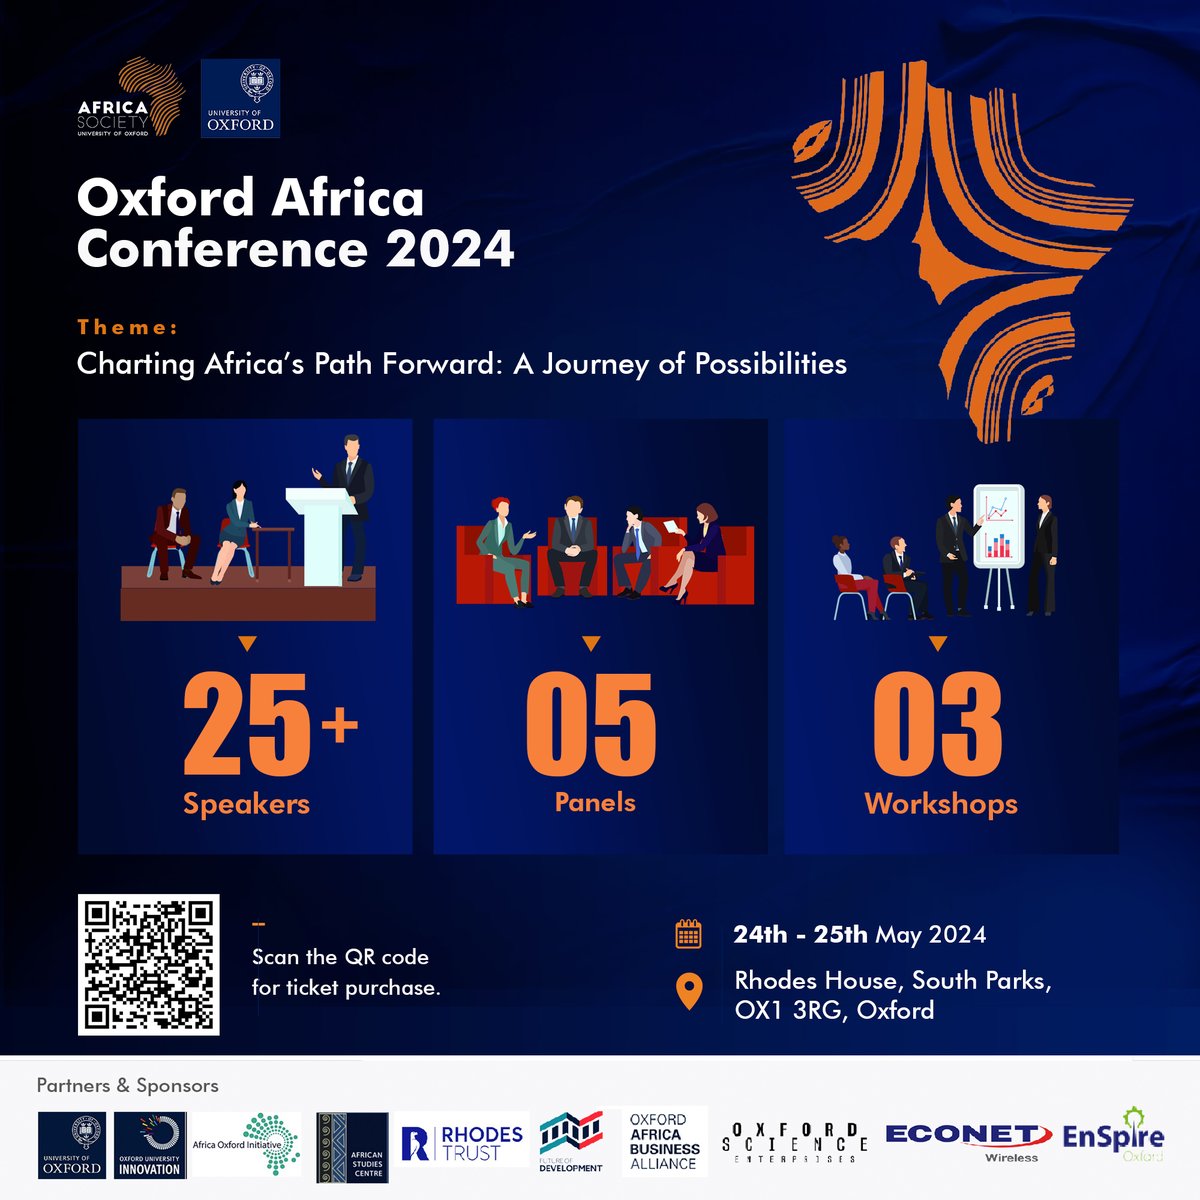 With over 25 speakers, 5 engaging panels, and 3 immersive workshops, the lineup for this year's Oxford Africa Conference is one you shouldn't miss. Have you secured your tickets yet? 🎟️

👉 Act Now: oxforduniversityafricasociety.com/oxford-africa-…

#OxfordAfricaConference2024 #UnleashAfrica #ISF2024